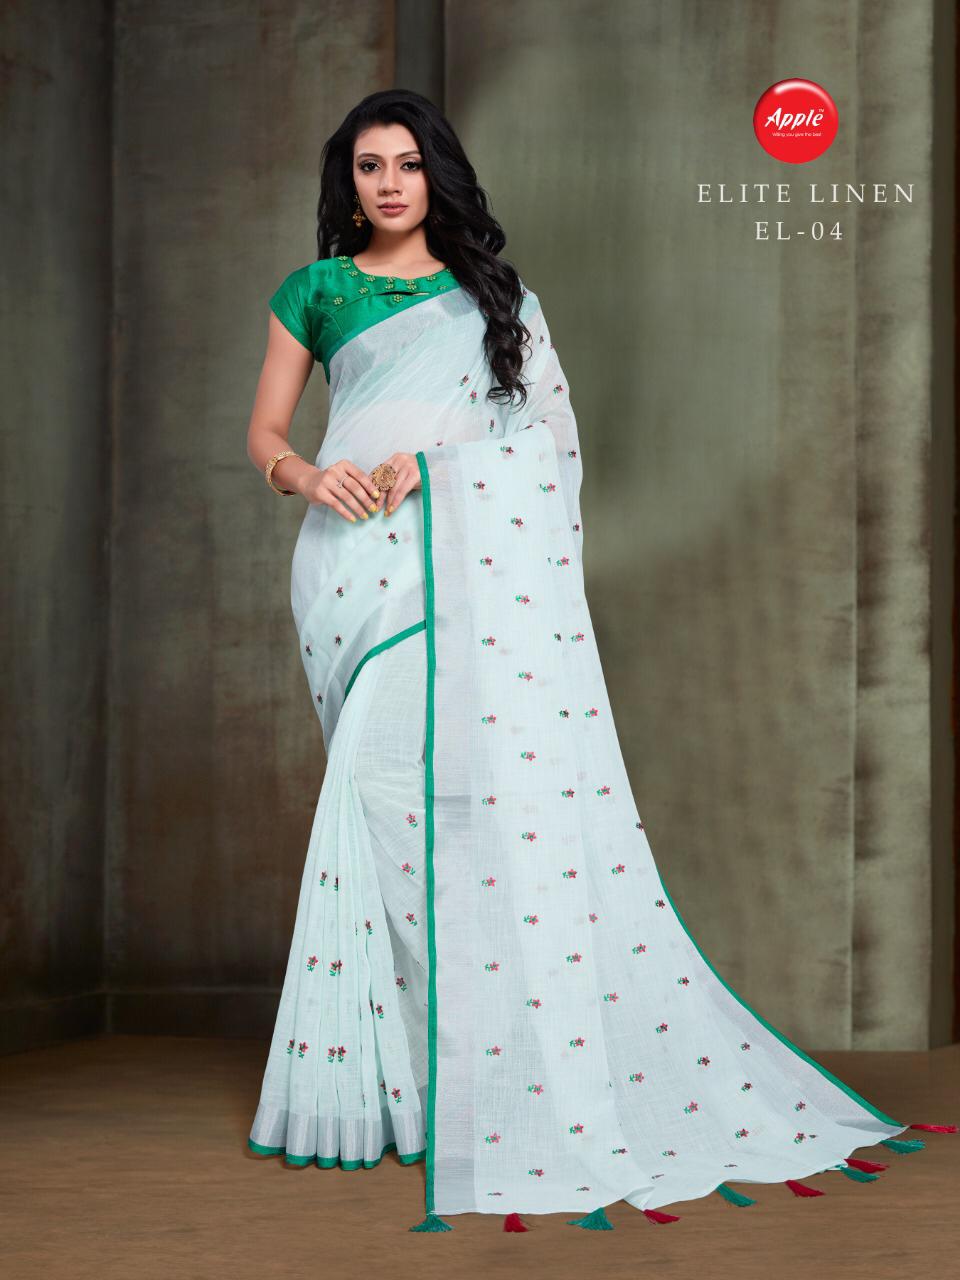 Apple elite linen astonishing style linen silk embroidery sarees with free size blouses